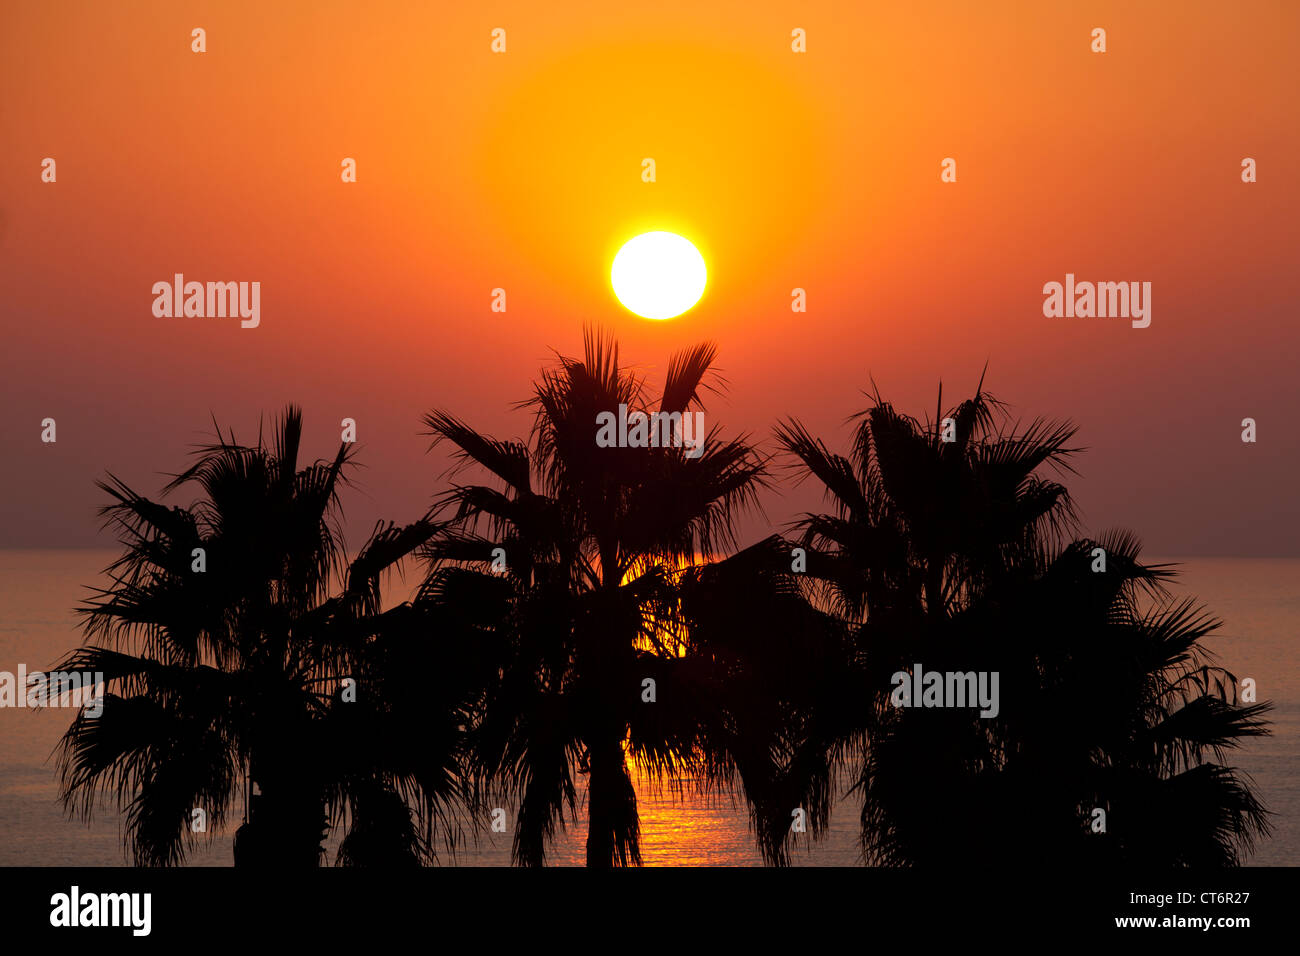 Sun setting over sea with palms silhouetted in foreground Stock Photo